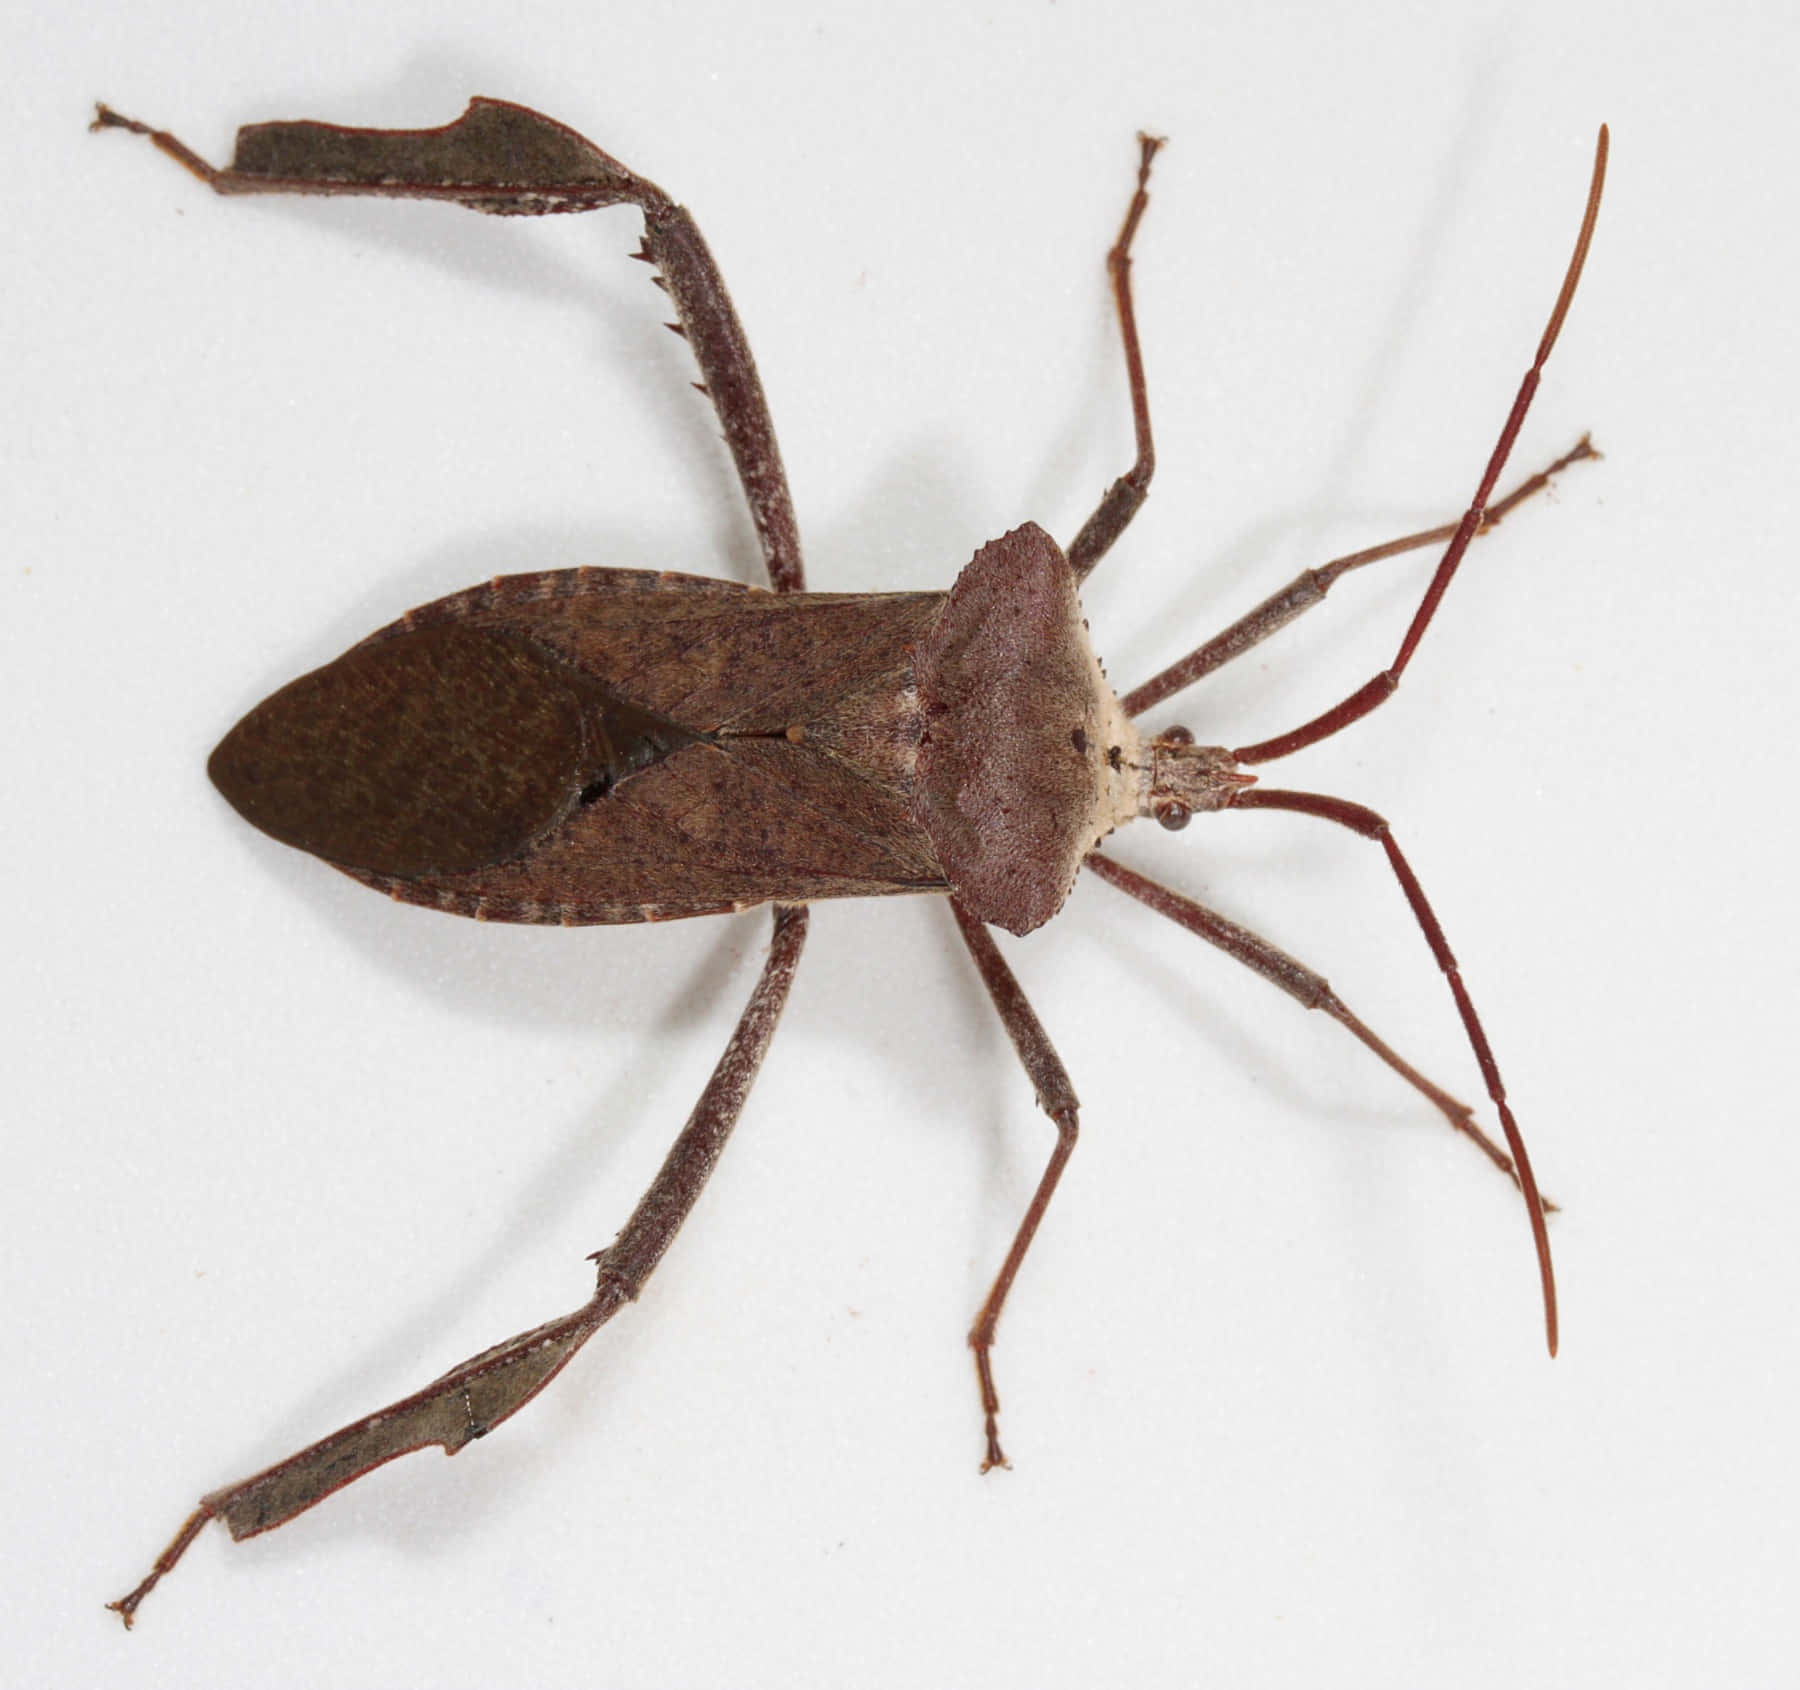 Leaffooted_ Bug_ Closeup Wallpaper